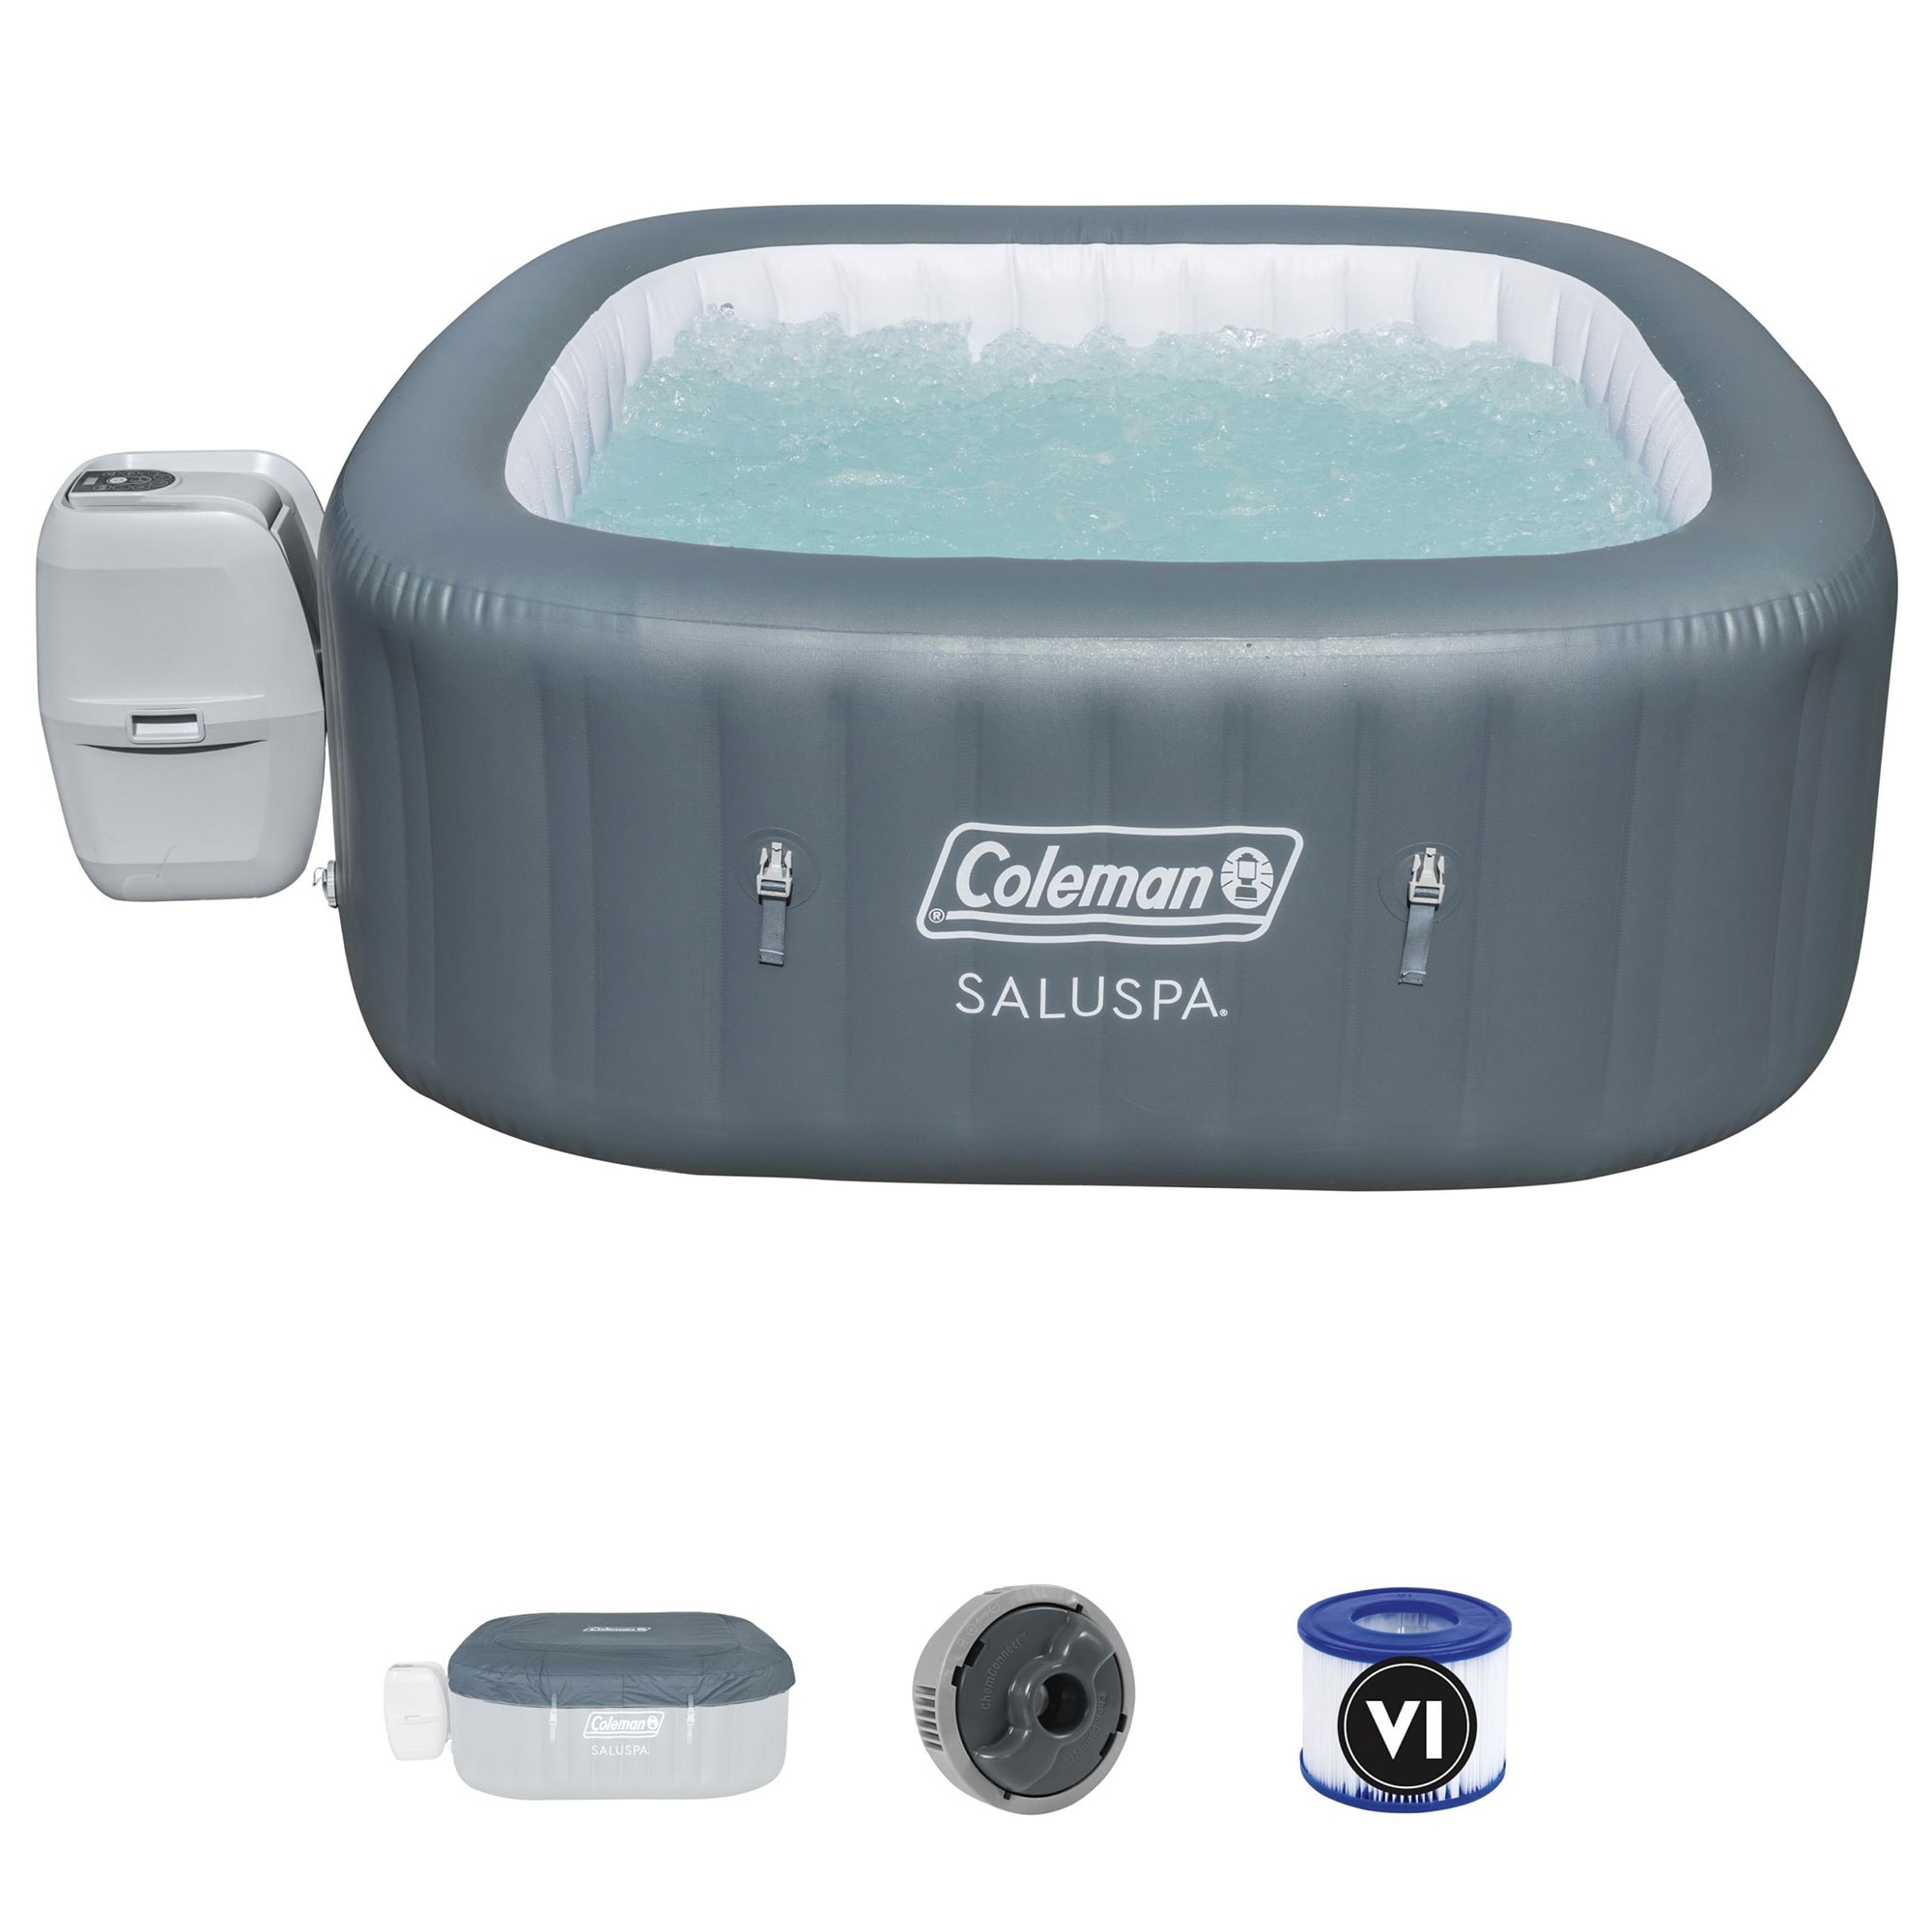 https://ak1.ostkcdn.com/images/products/is/images/direct/0d7bb204be1471b915272cf6c59abbc7fe24db0b/Coleman-SaluSpa-6-Person-Inflatable-Squared-Hot-Tub-Spa-with-114-AirJets%2C-Grey.jpg